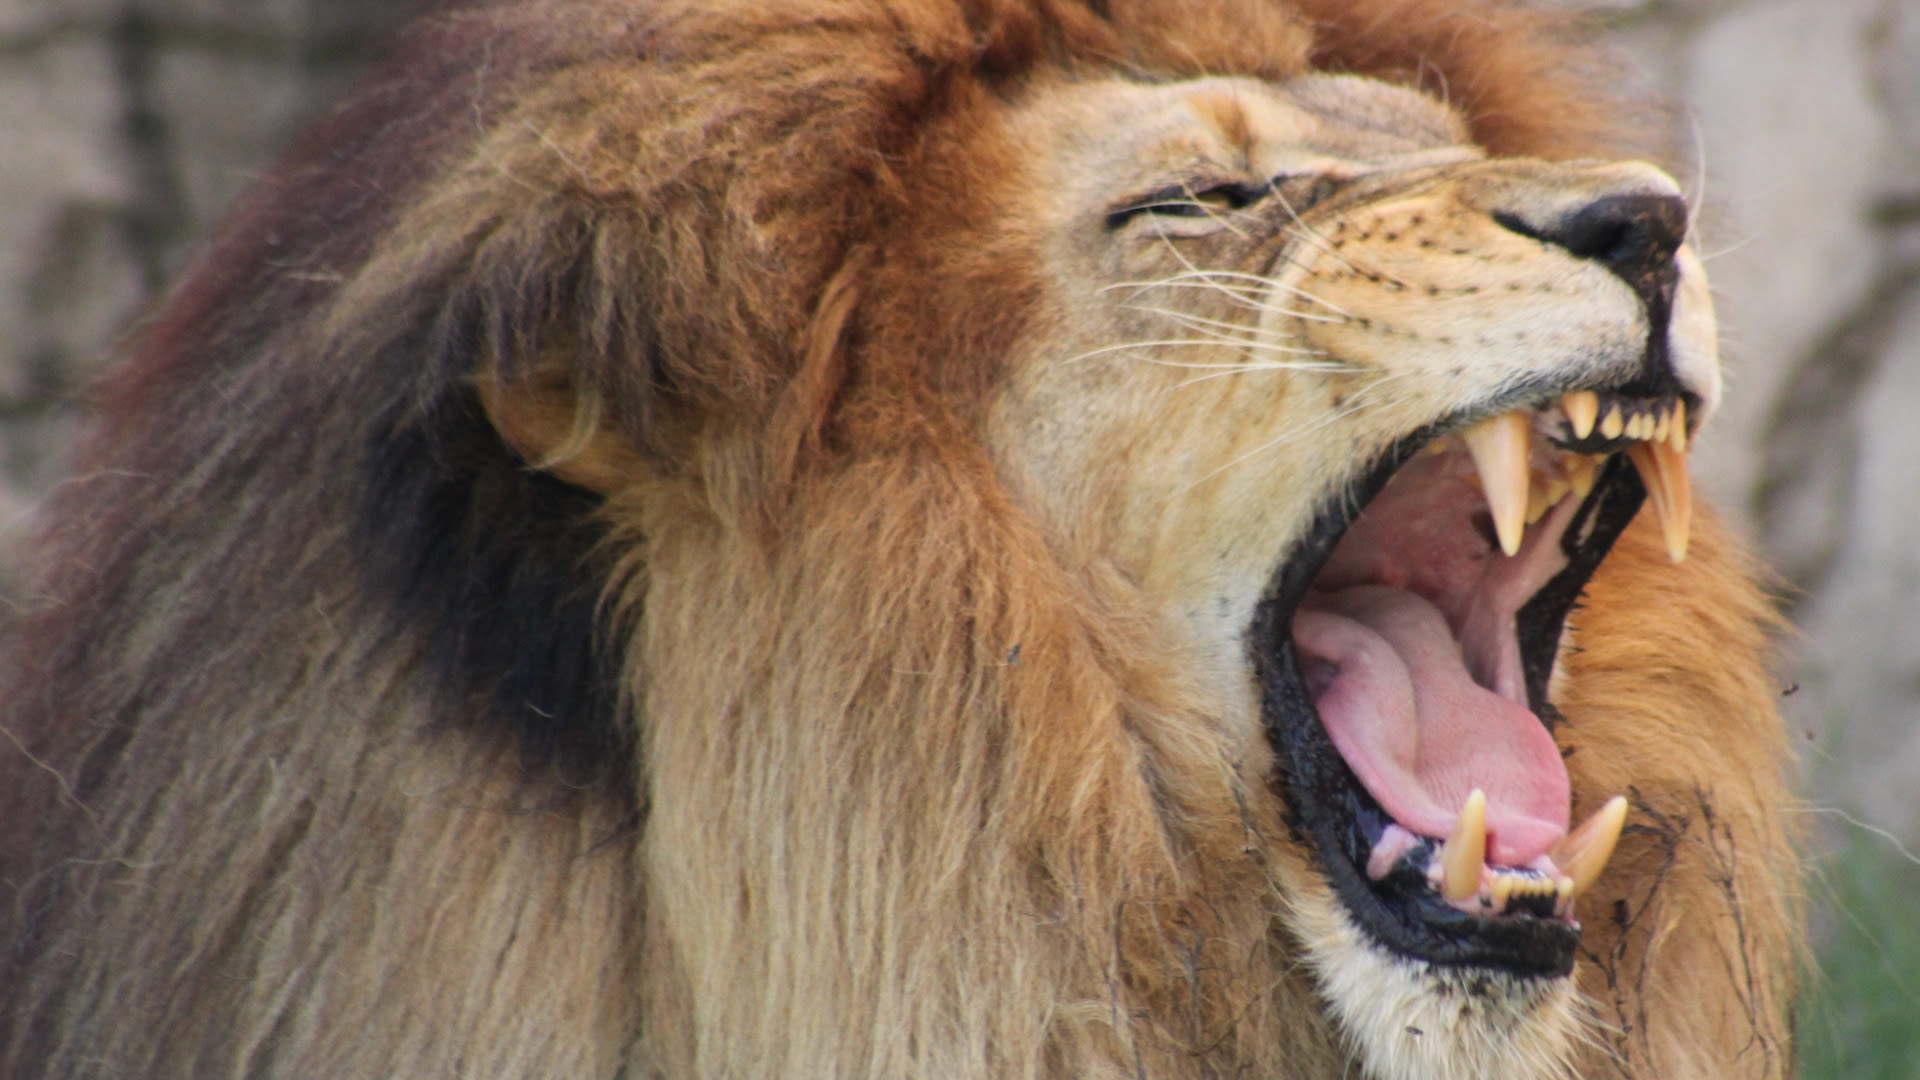 32 of the loudest animals on Earth